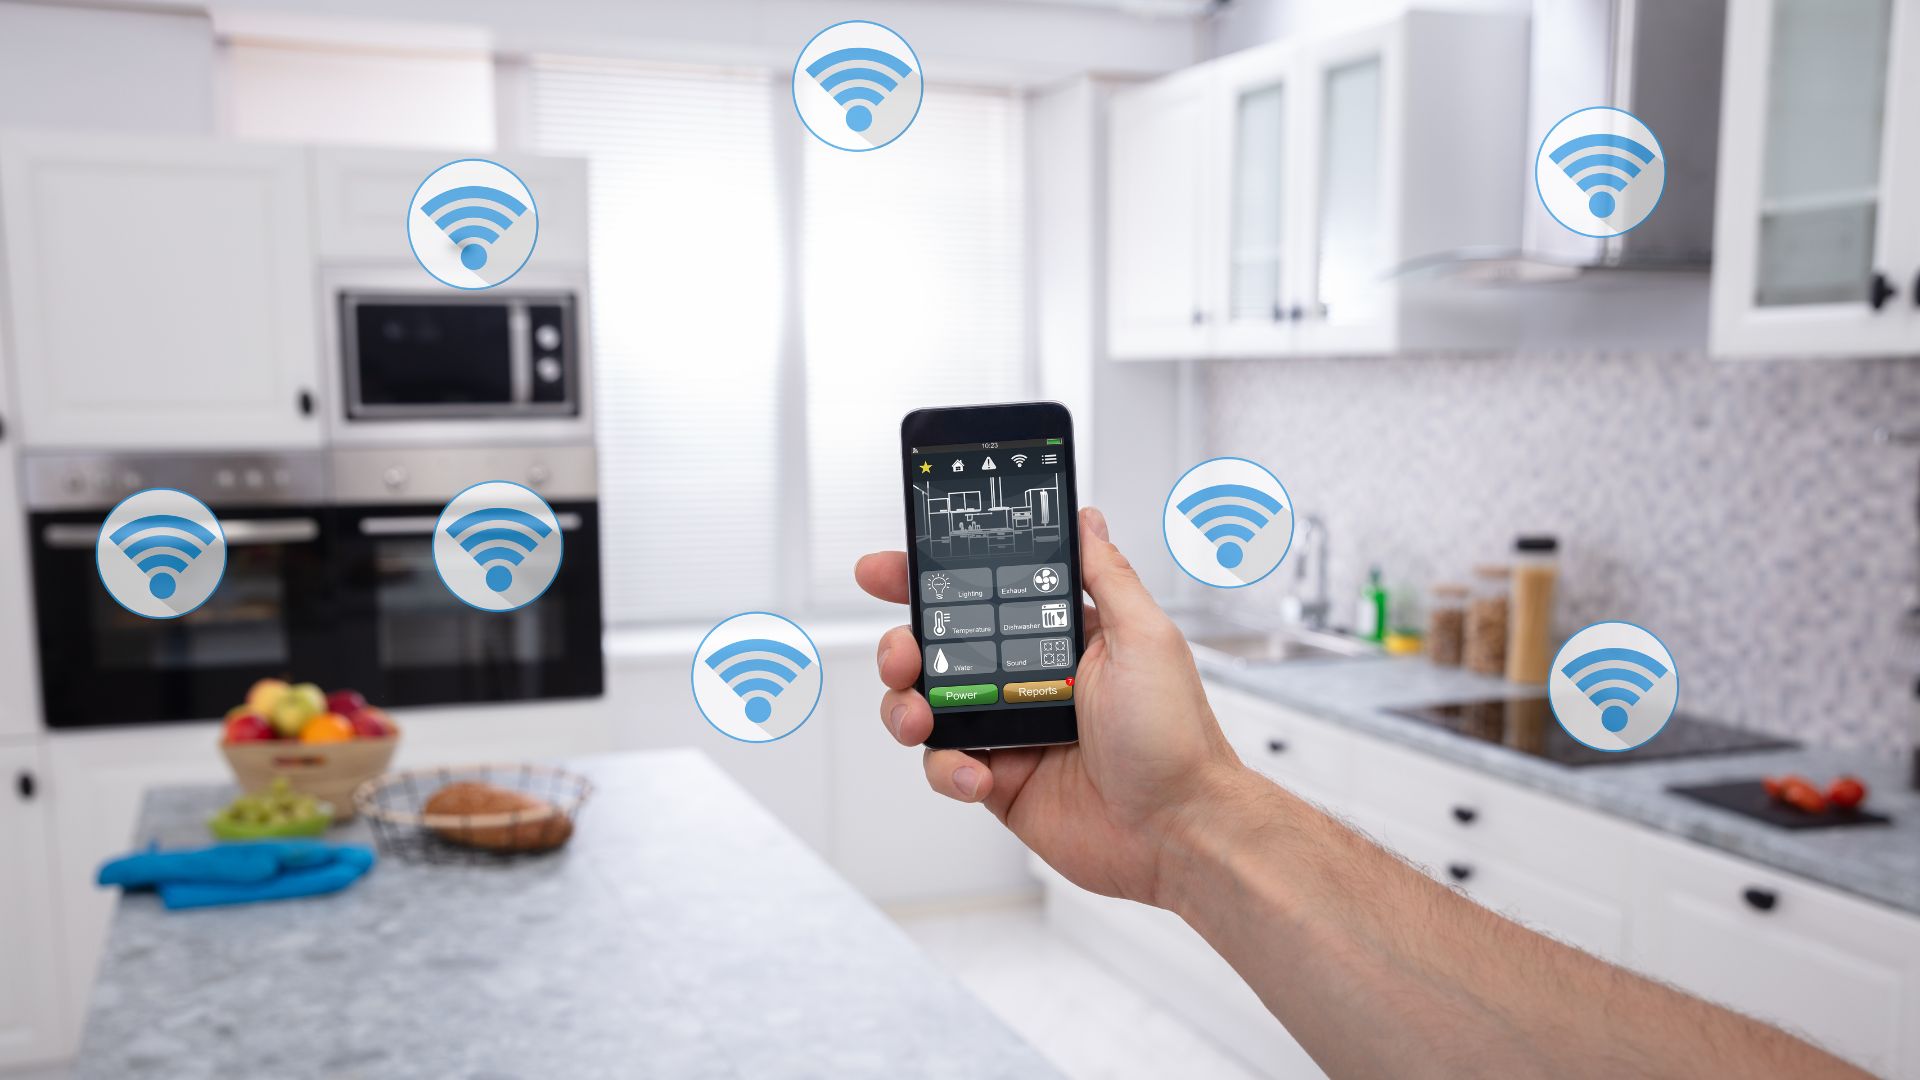 10 Most Common Smart Home Issues and How to Fix Them